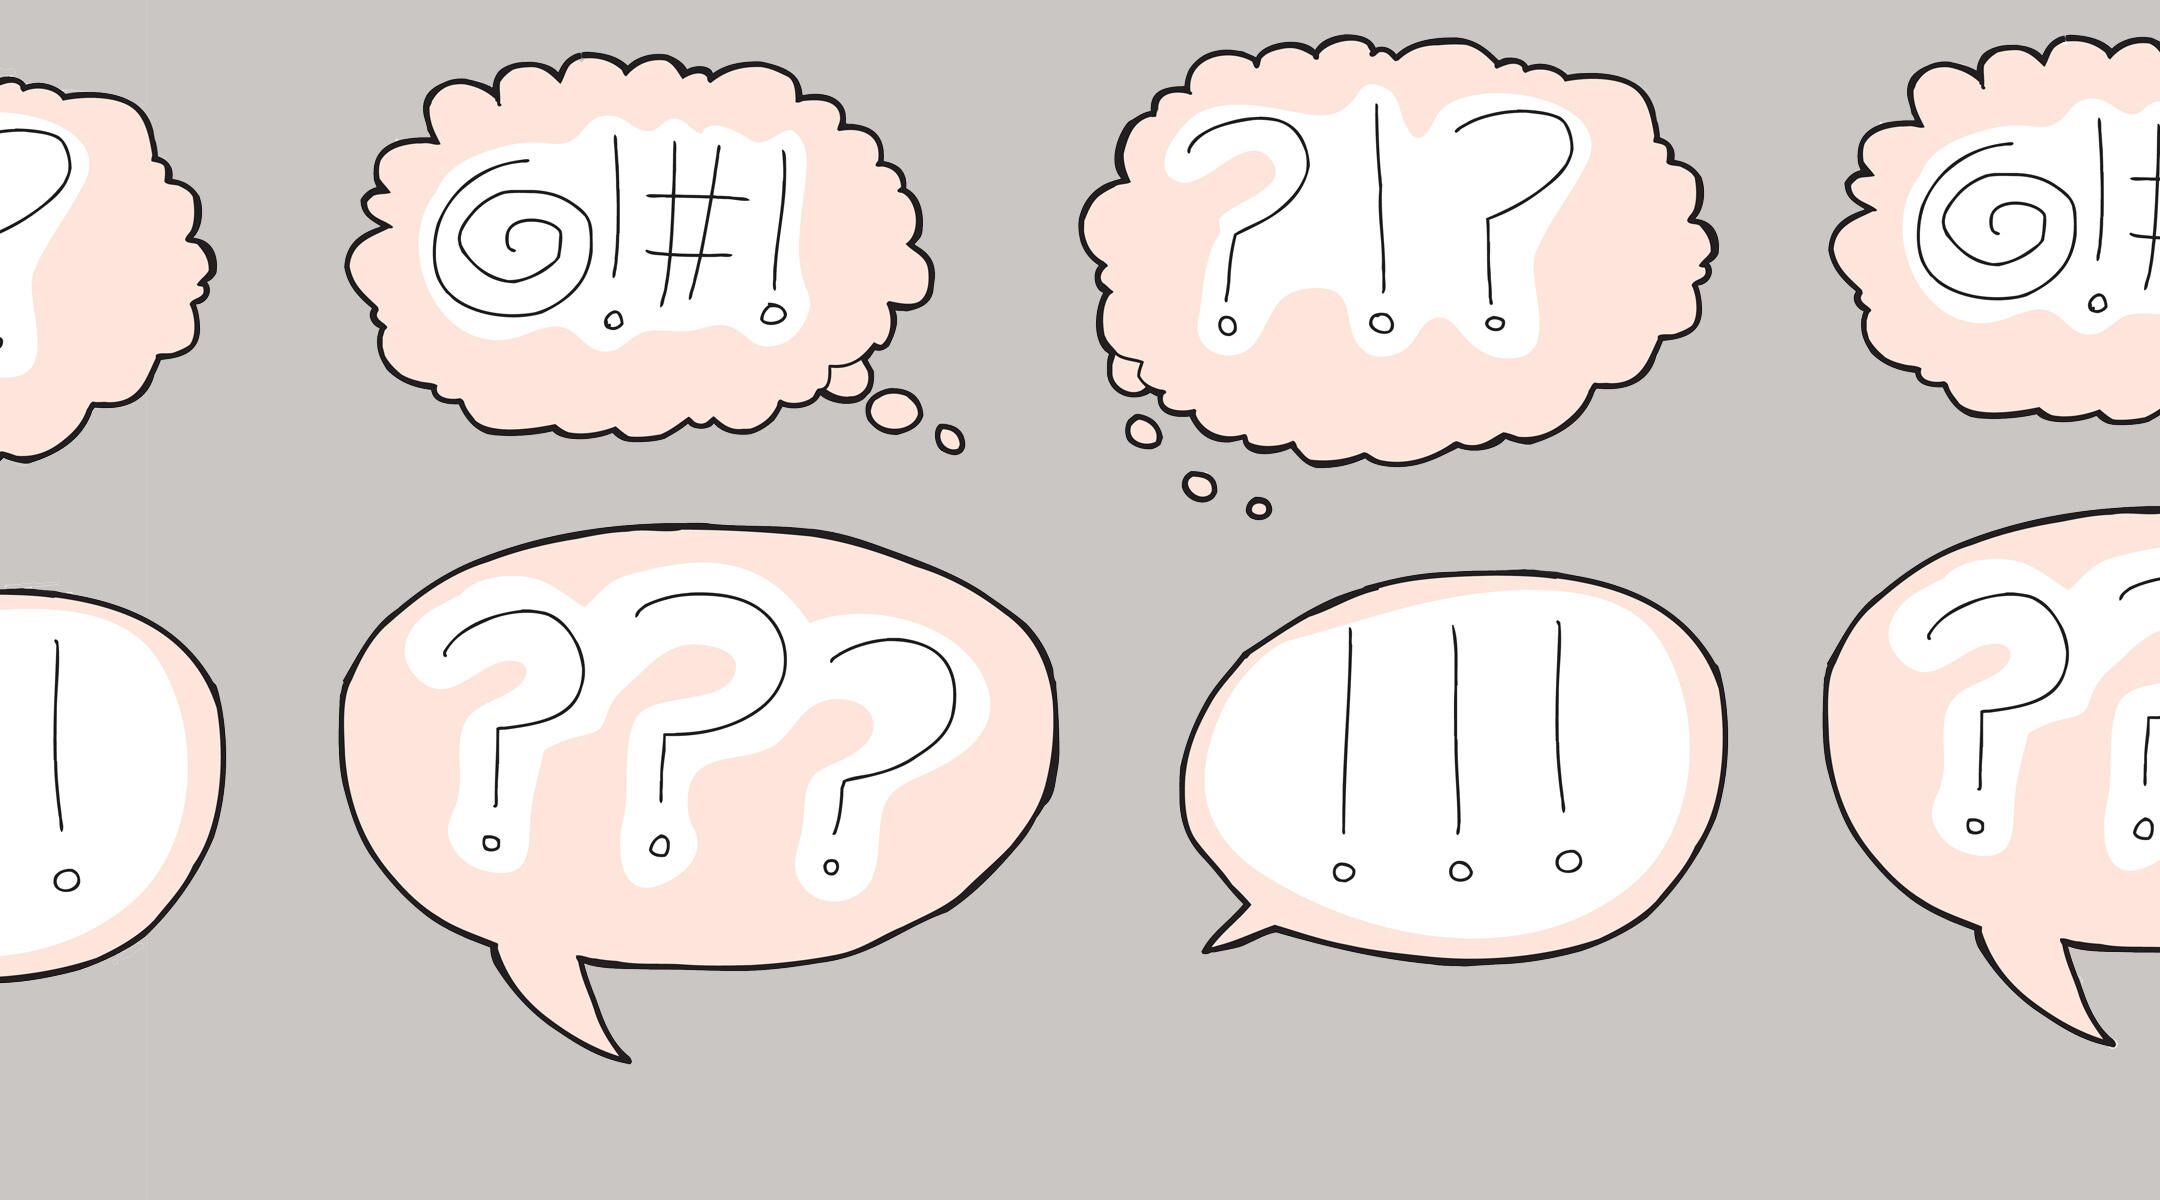 Illustration of various speech bubbles containing expressive punctuation marks.